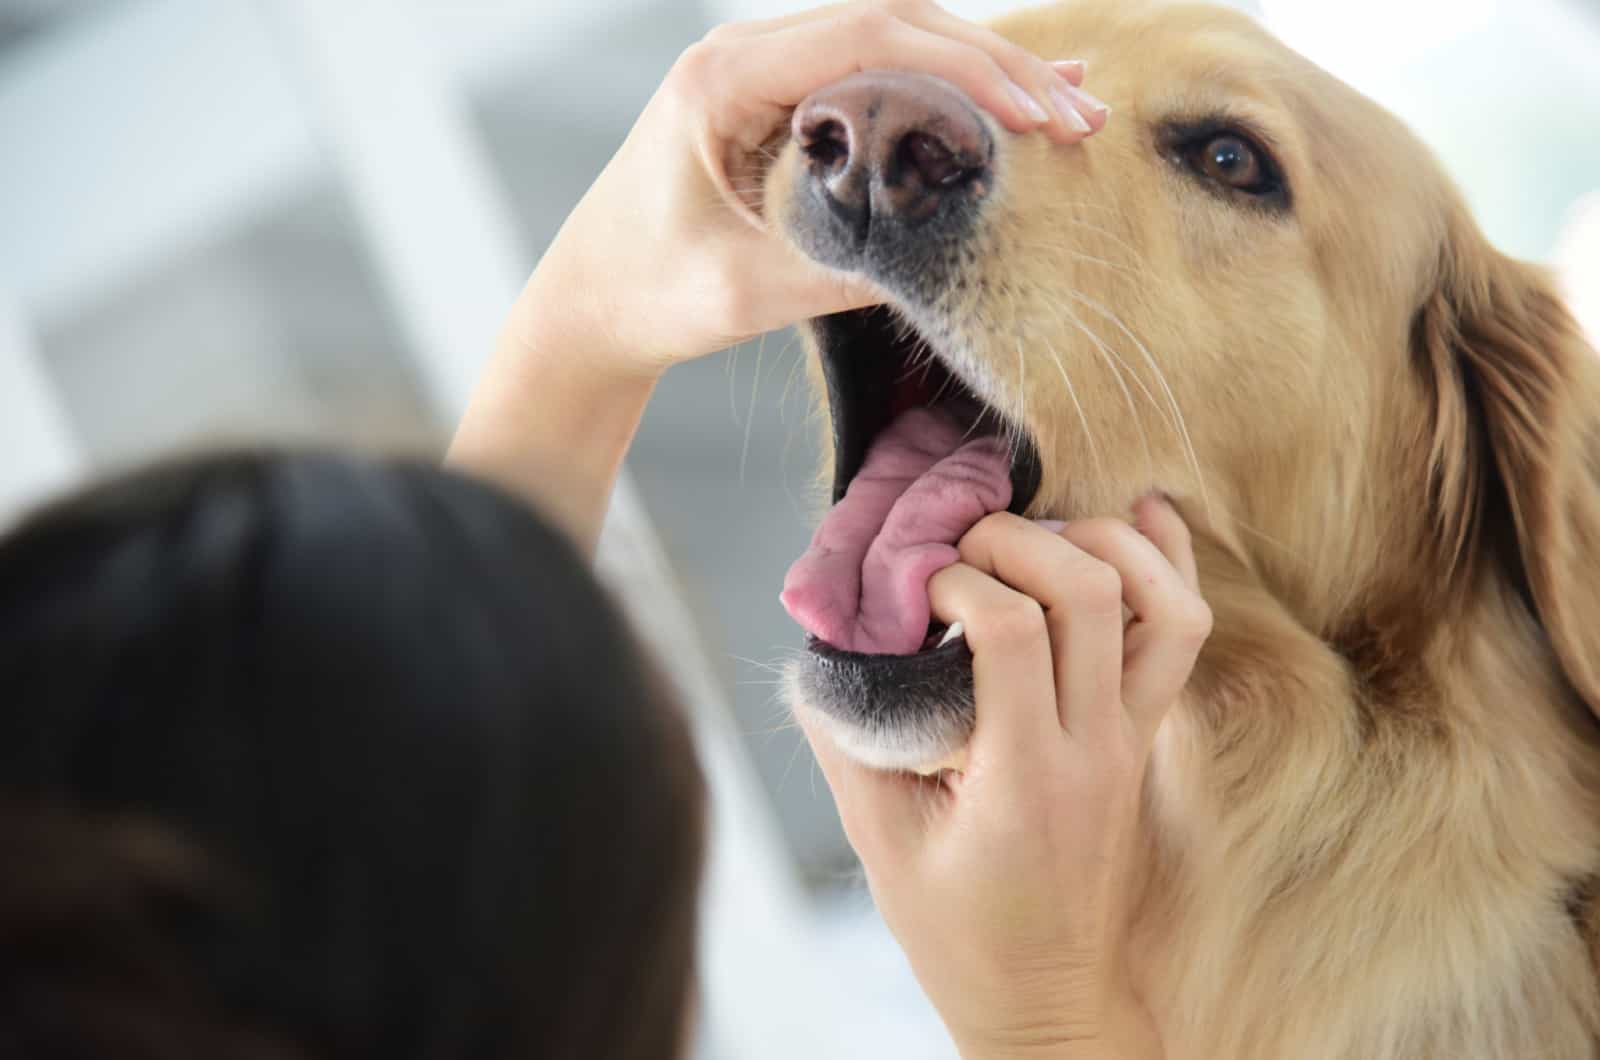 person checking dog's mouth